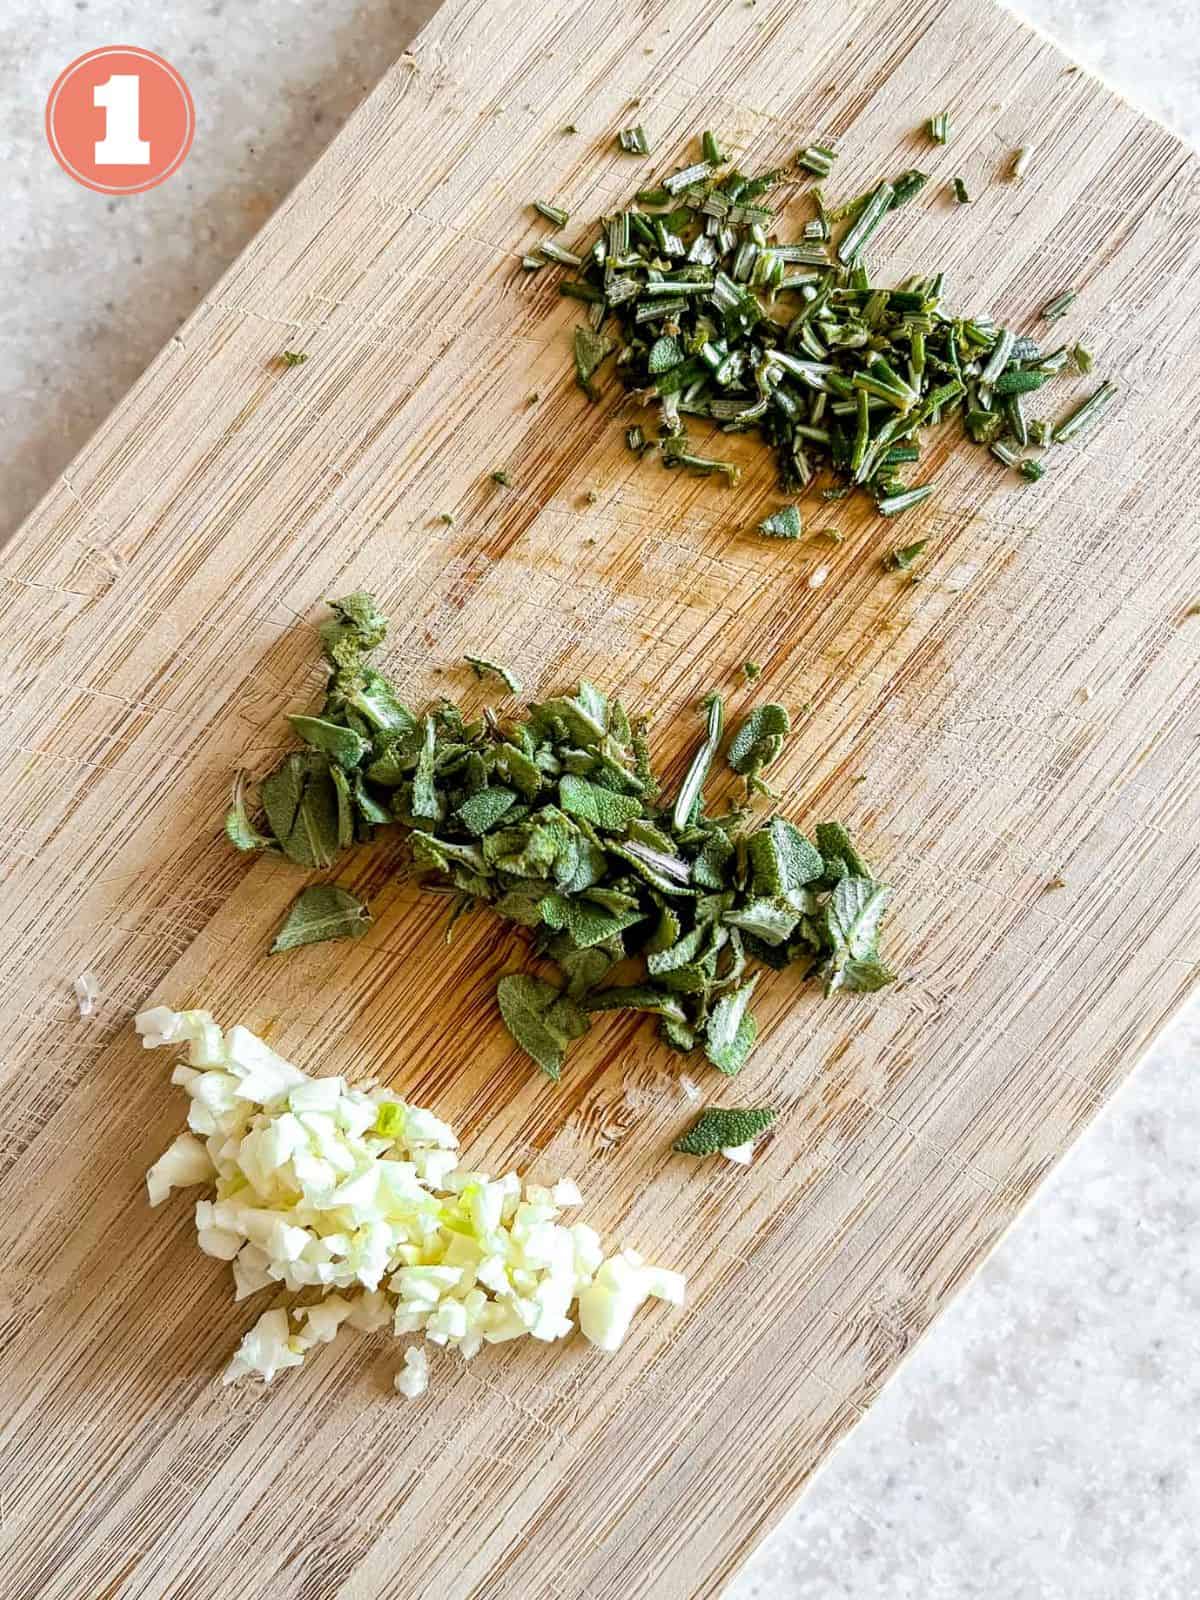 diced herbs and garlic on a wooden board labelled number one.